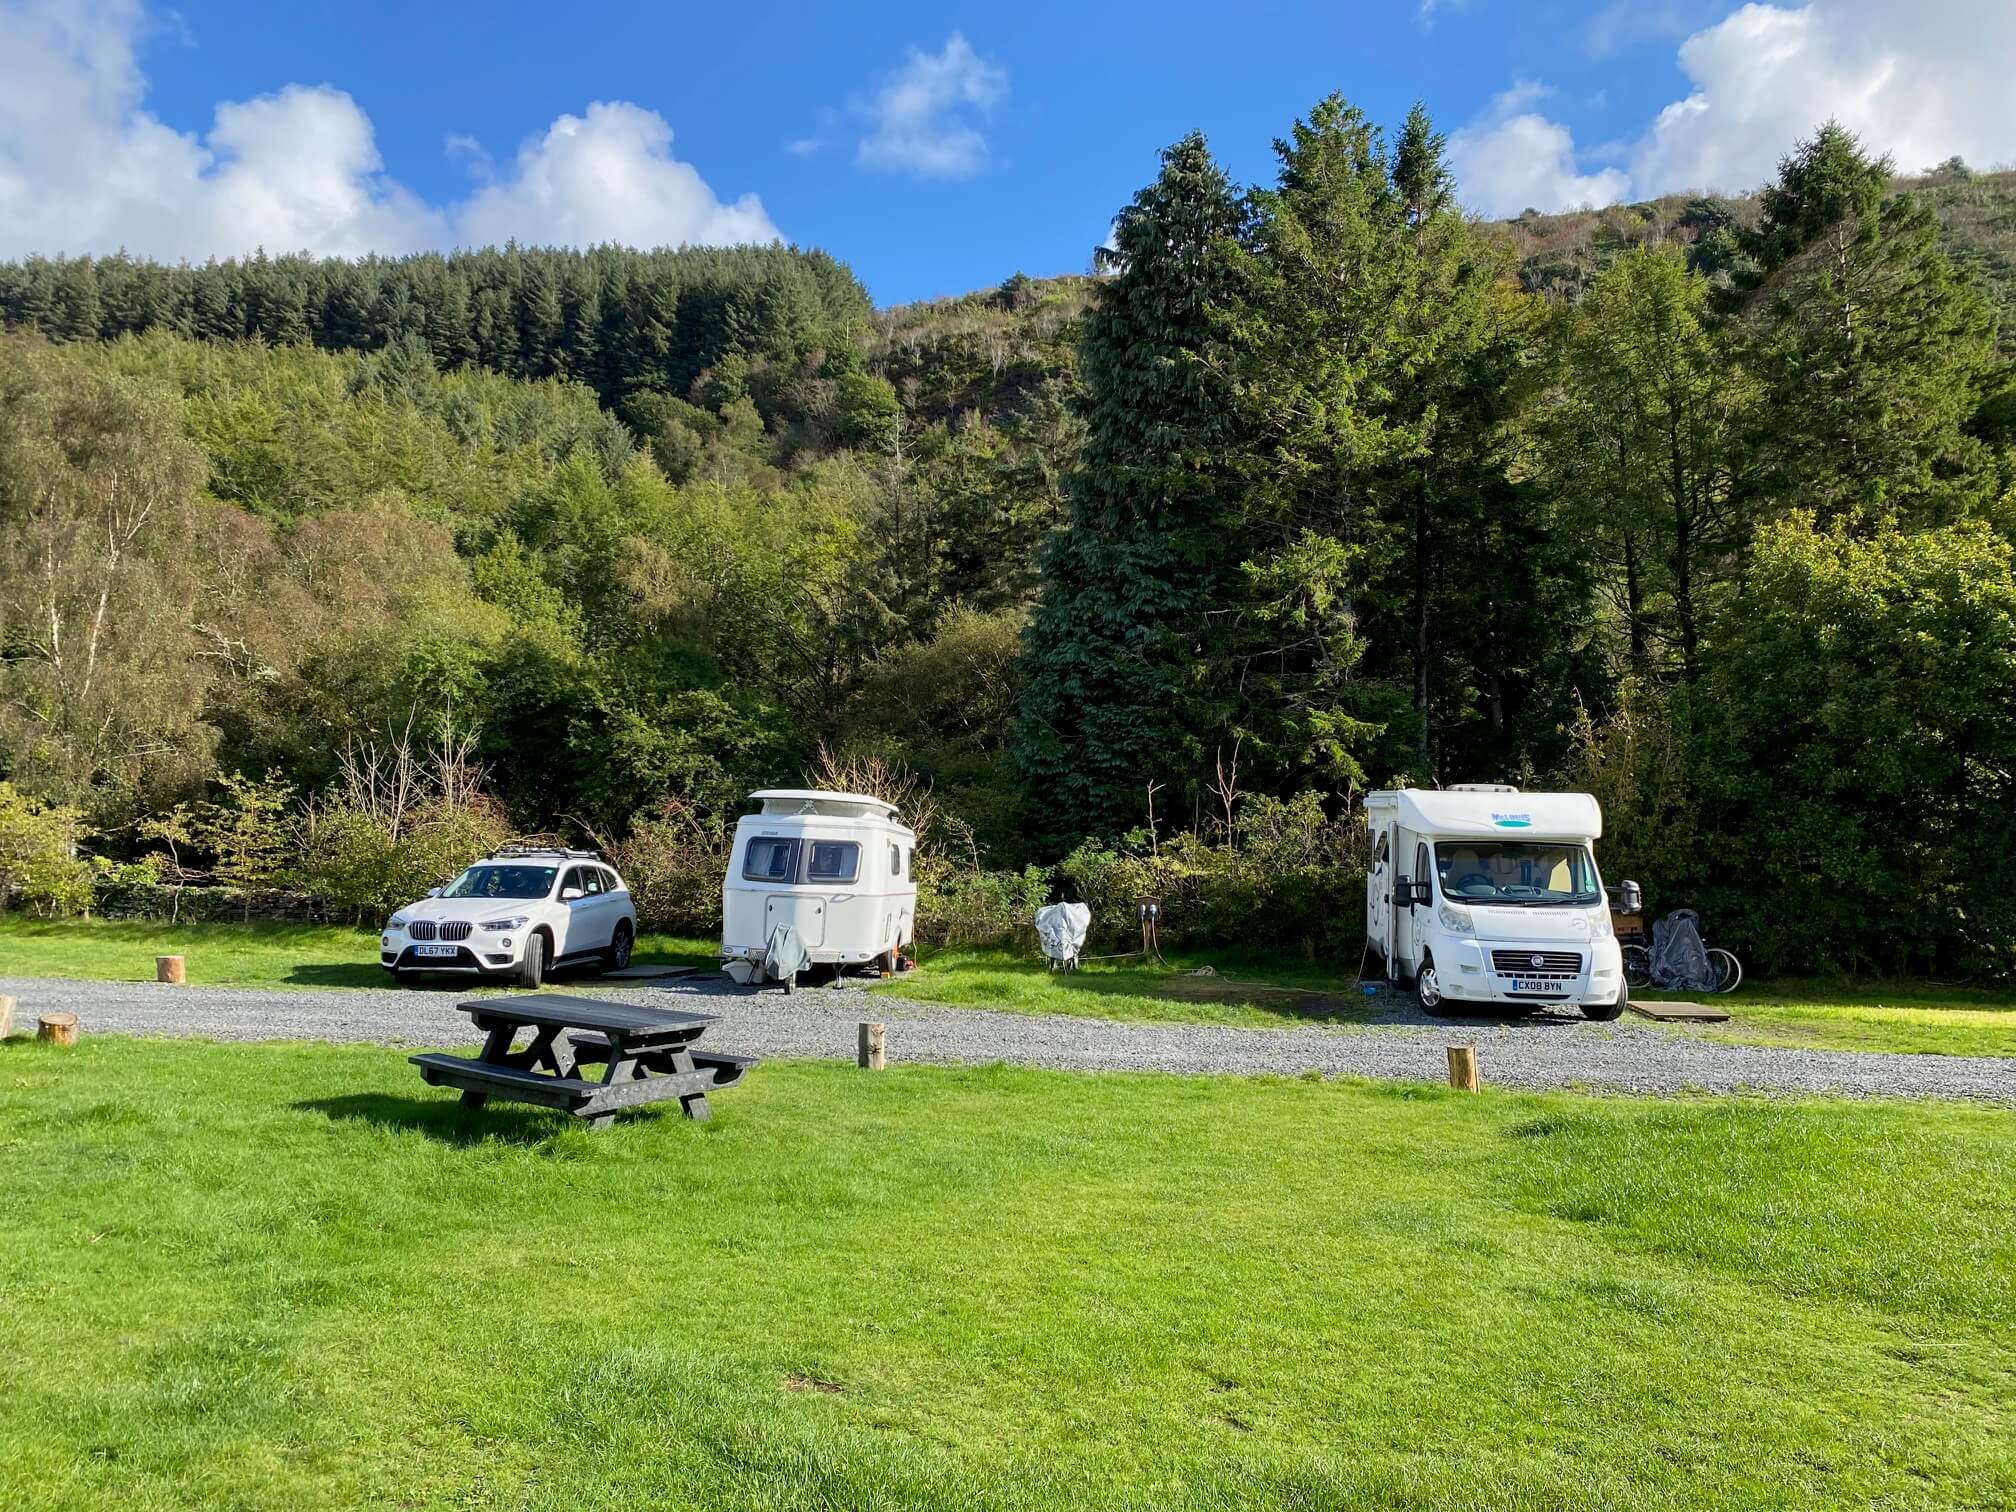 Best Camping Snowdonia, Snowdonia Camping, Pet Friendly Accommodation Snowdonia, Holiday In Snowdonia, Campsite In Snowdonia Wales